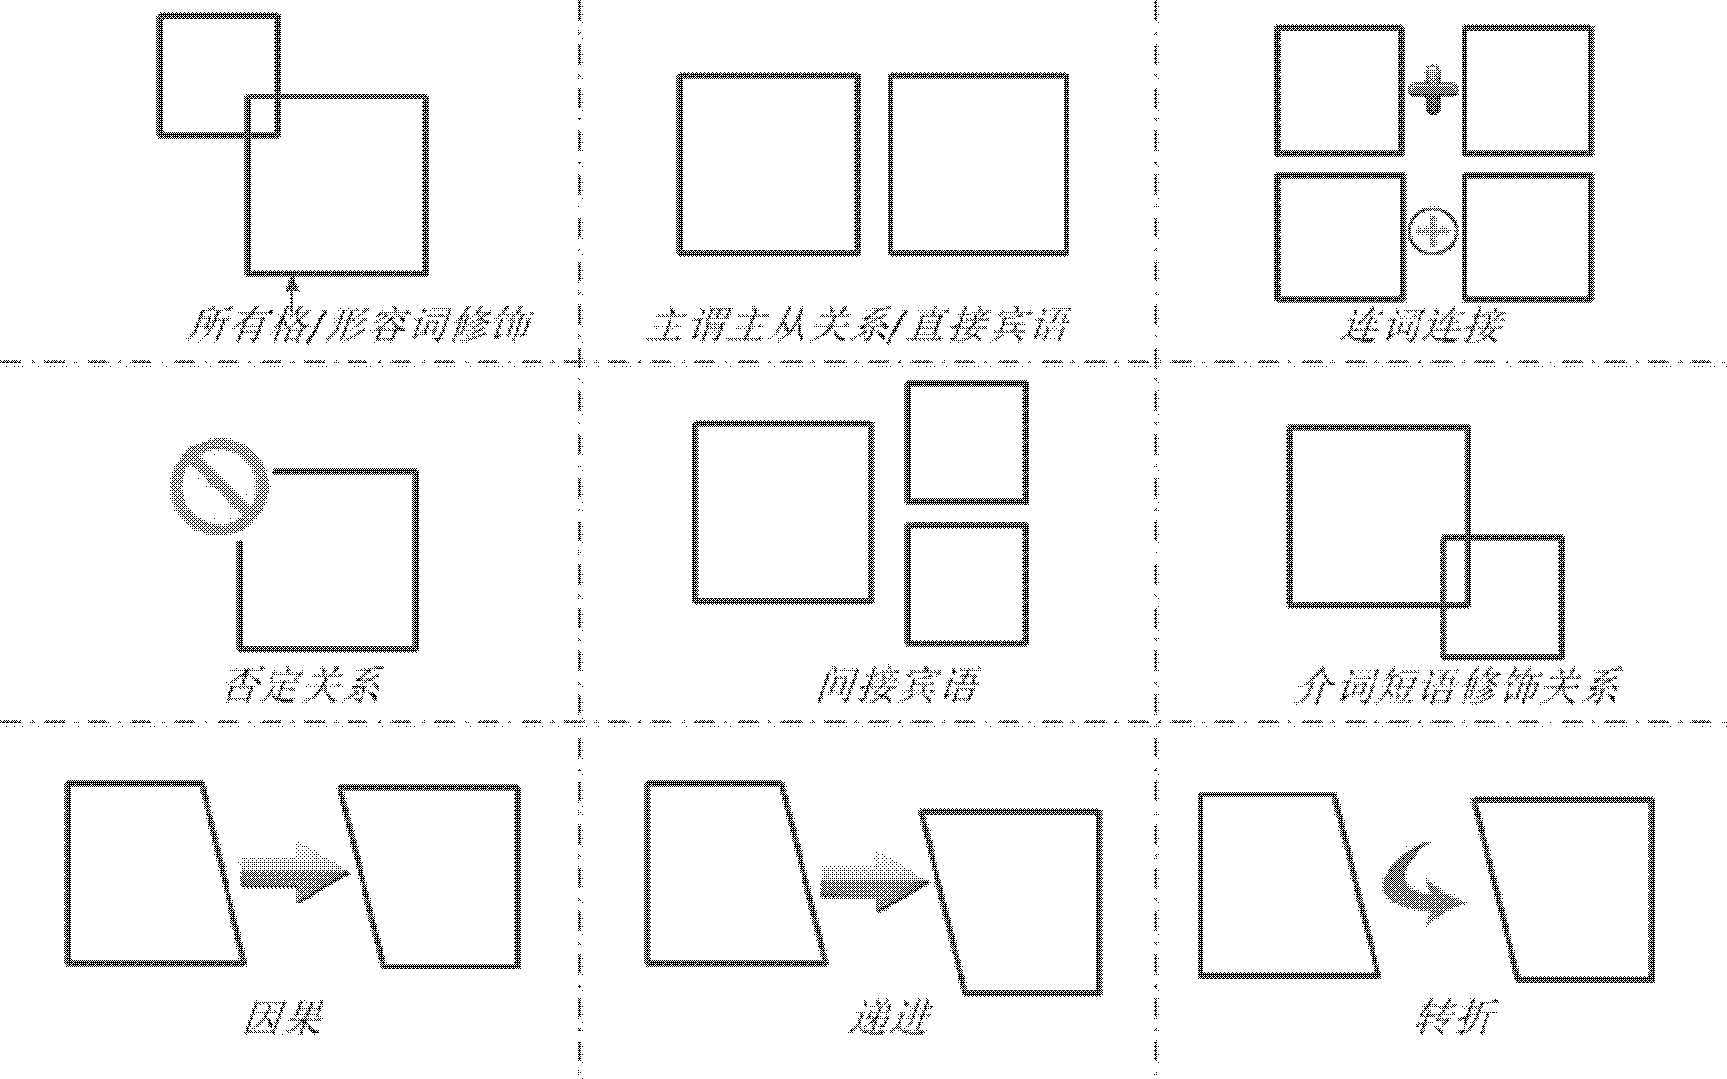 Method and system for instant messaging with visual messaging assistance